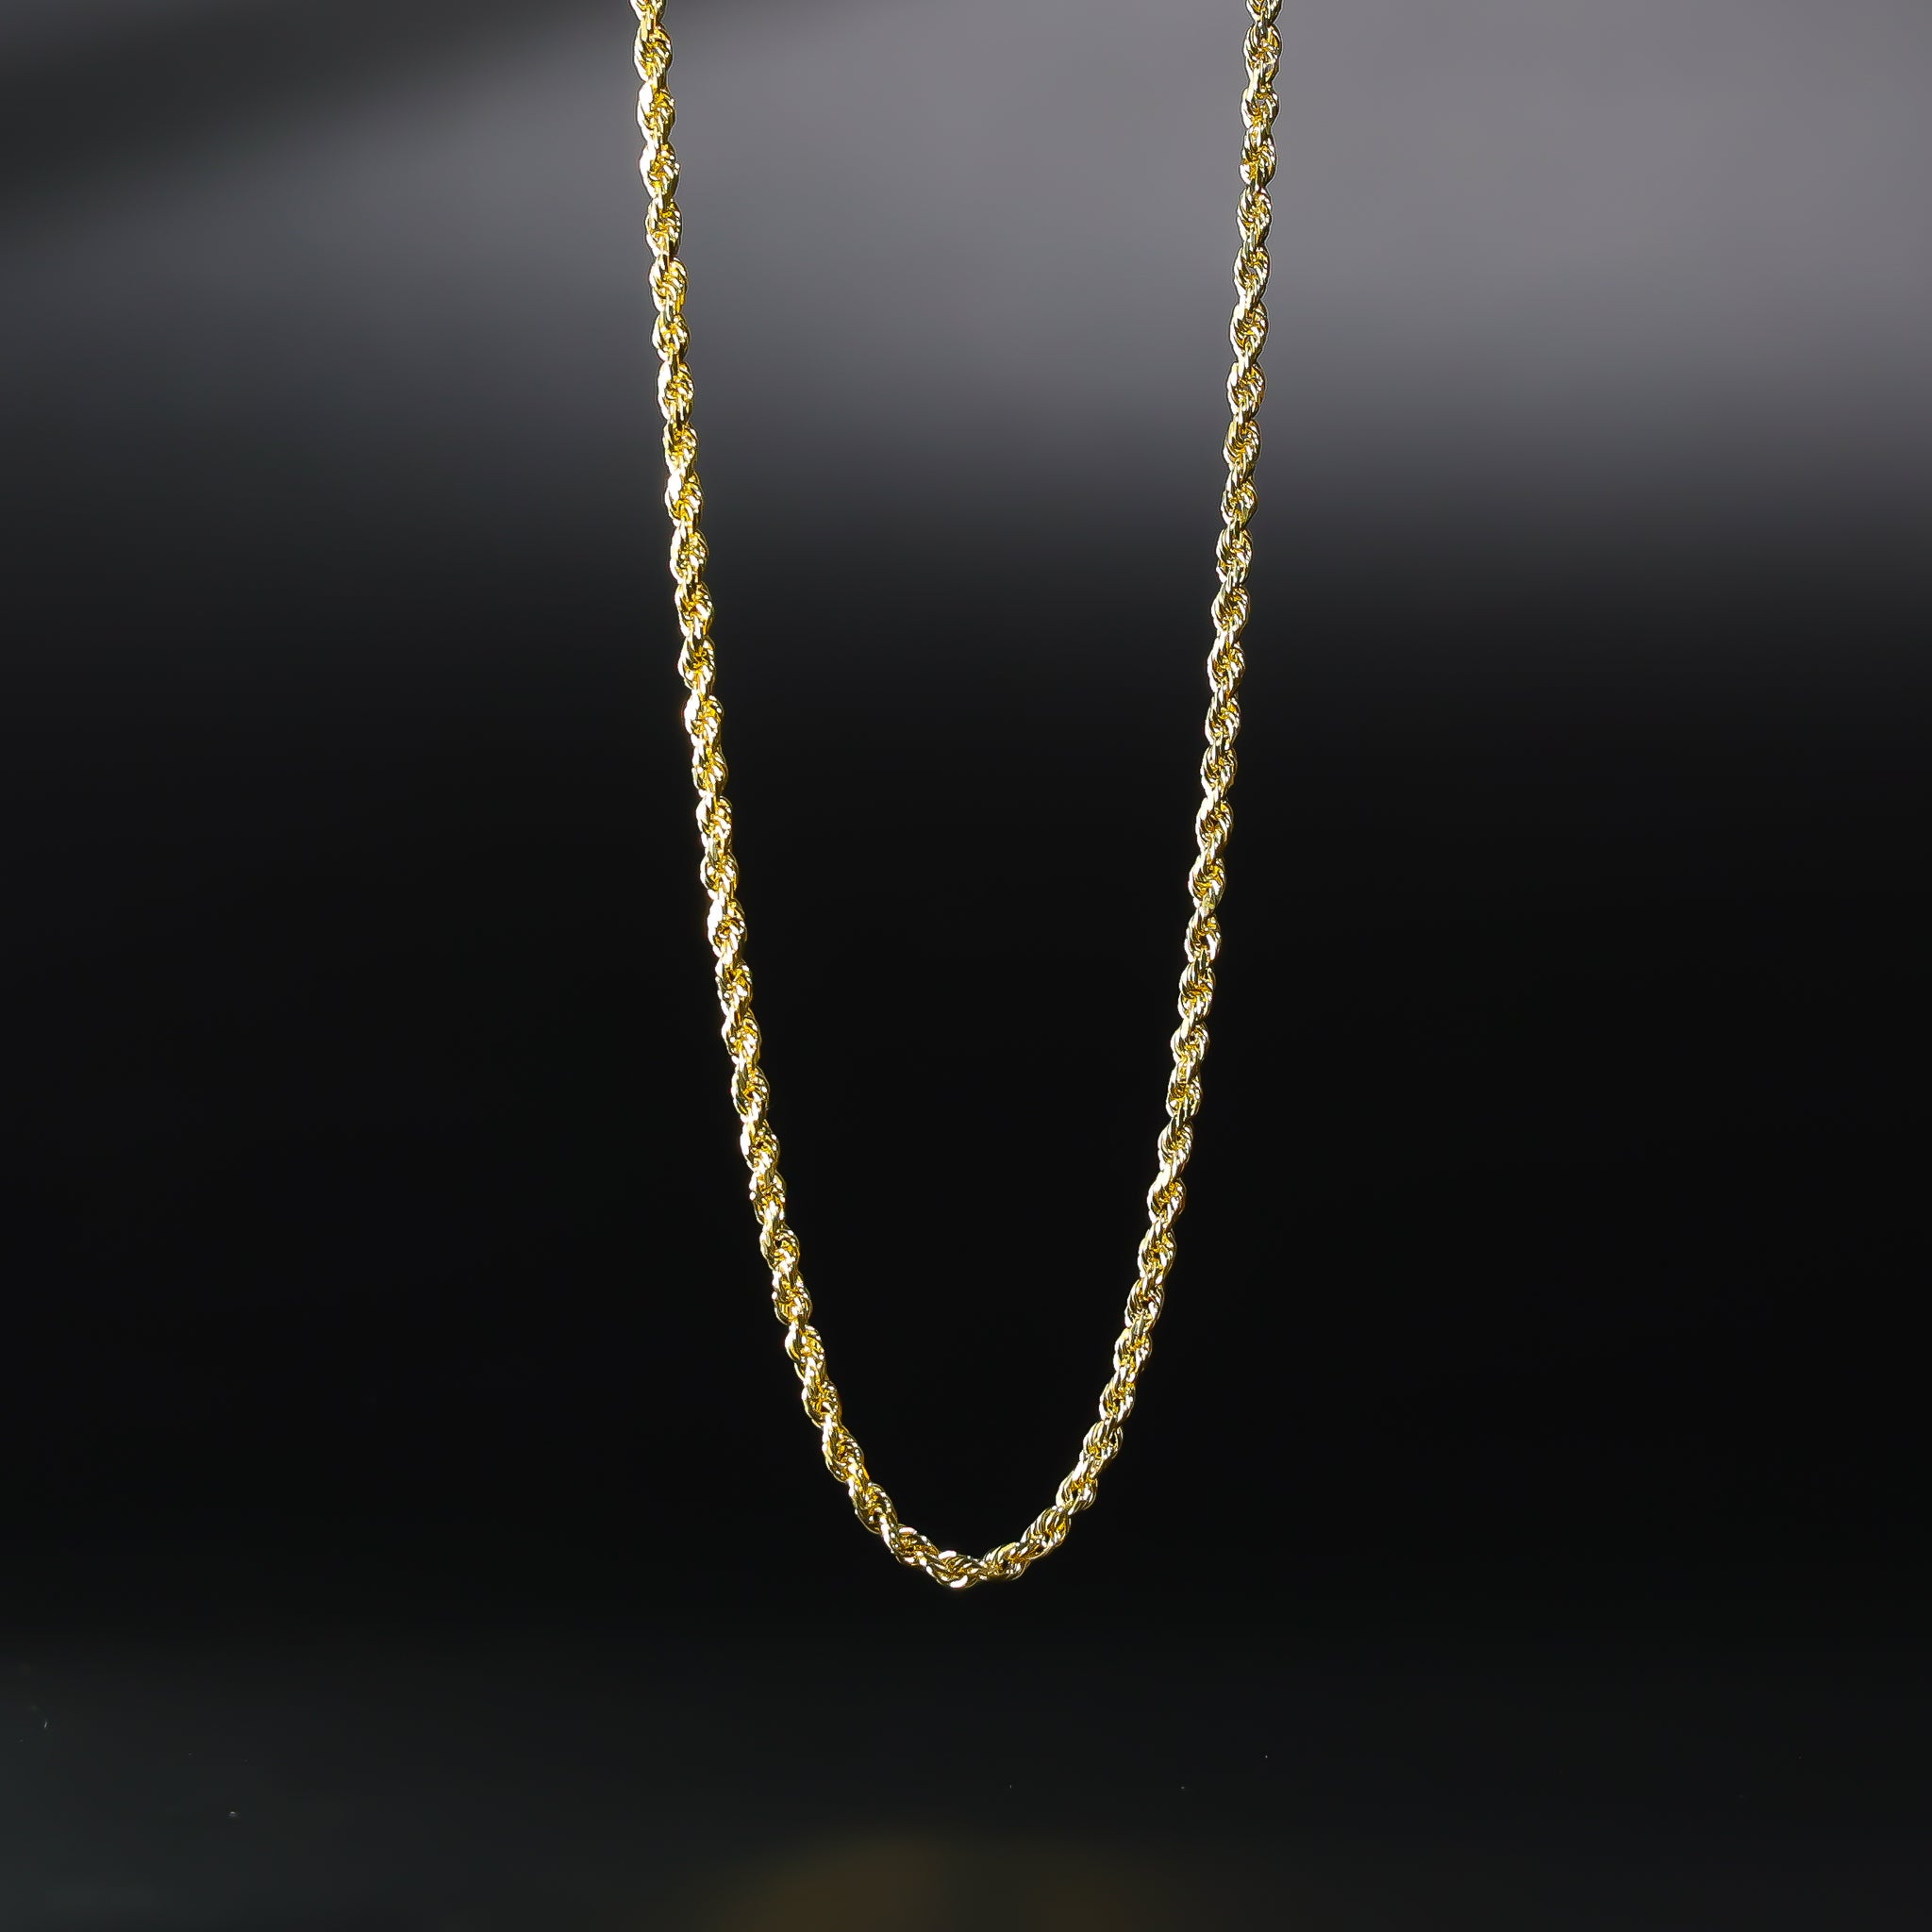 2mm 14k Solid Gold Rope Chain Diamond Cut Model-0389 - Charlie & Co. Jewelry